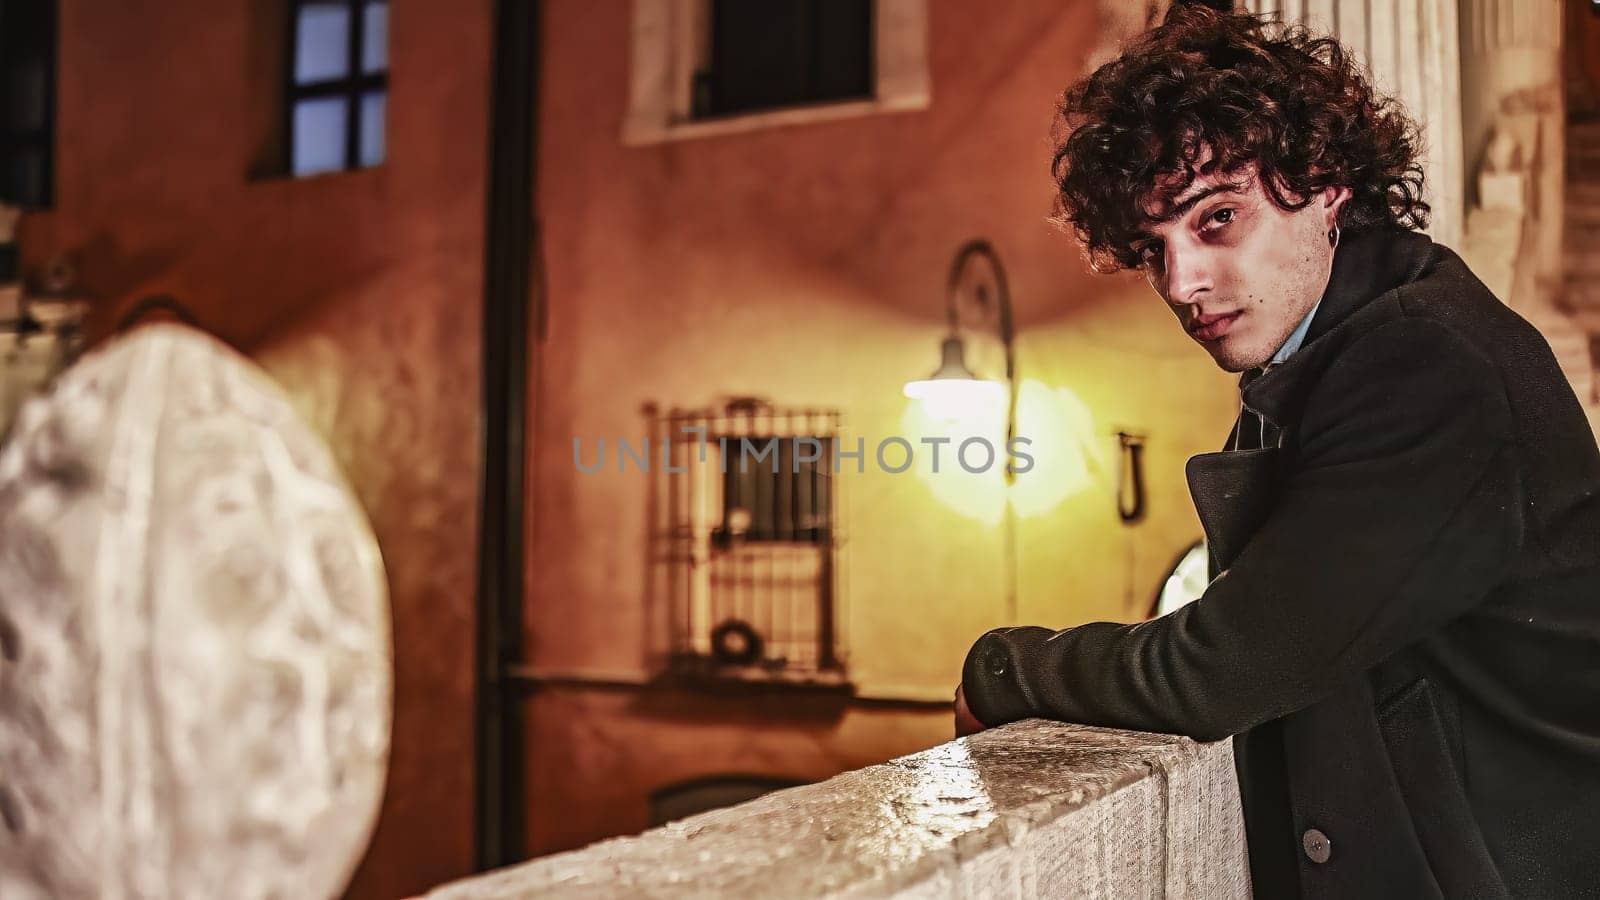 Lost in Thought: Thoughtful Young Man Leaning on Handrail in City at Night by pippocarlot